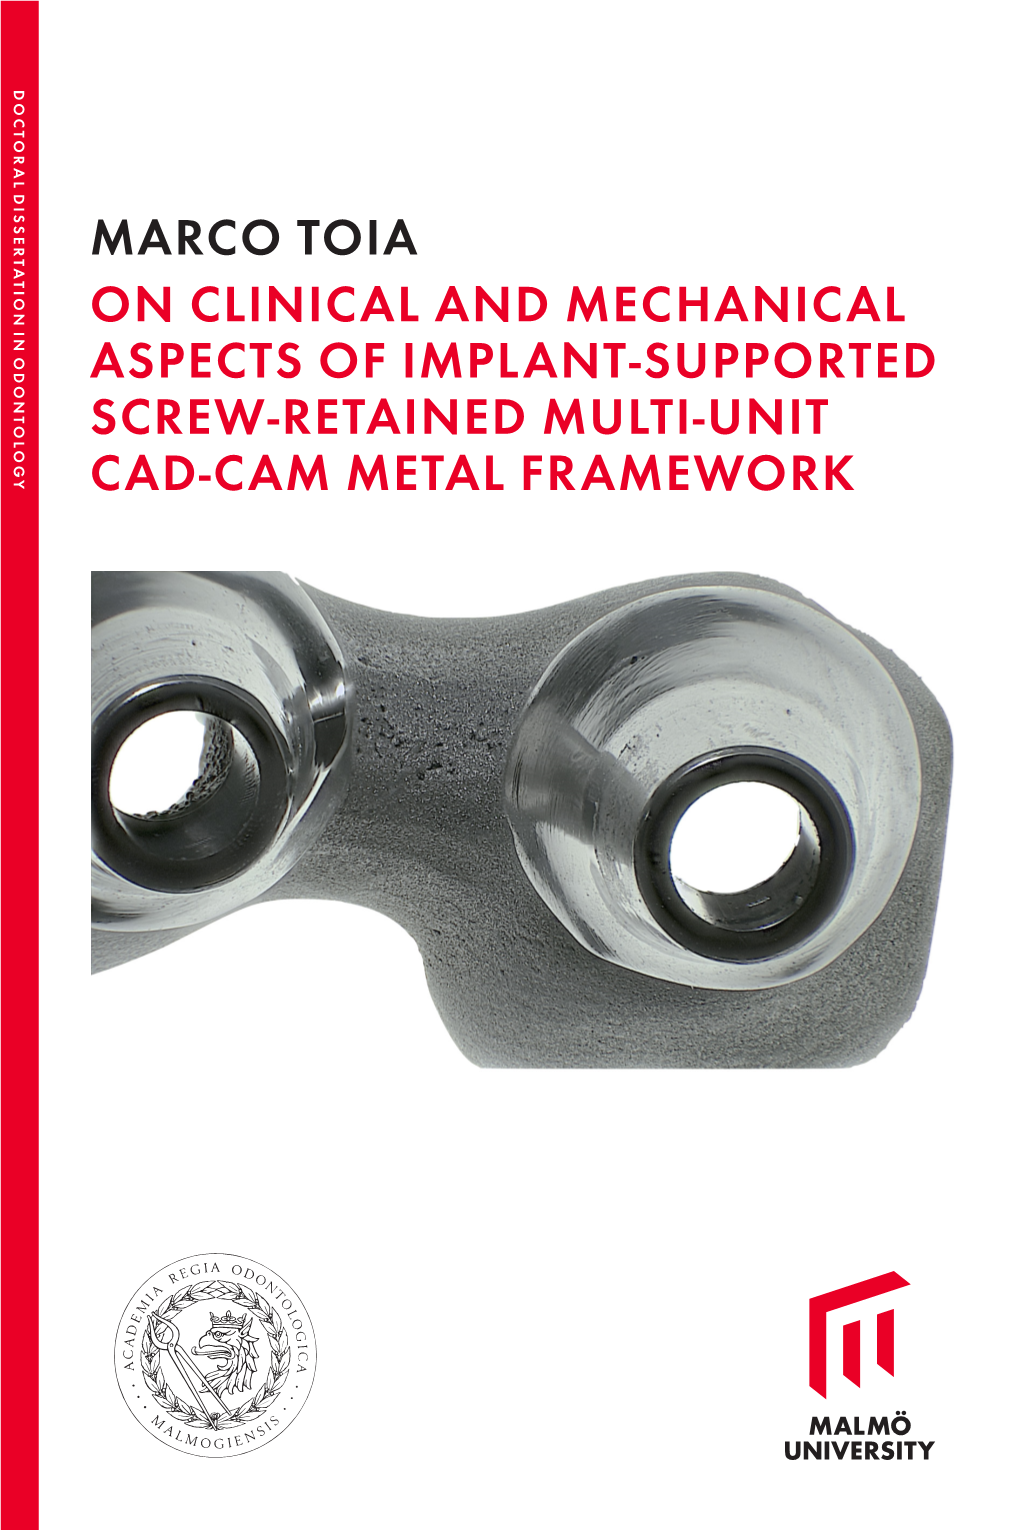 Marco Toia on Clinical and Mechanical Aspects of Implant-Supported Screw-Retained Multi-Unit Cad-Cam Metal Framework